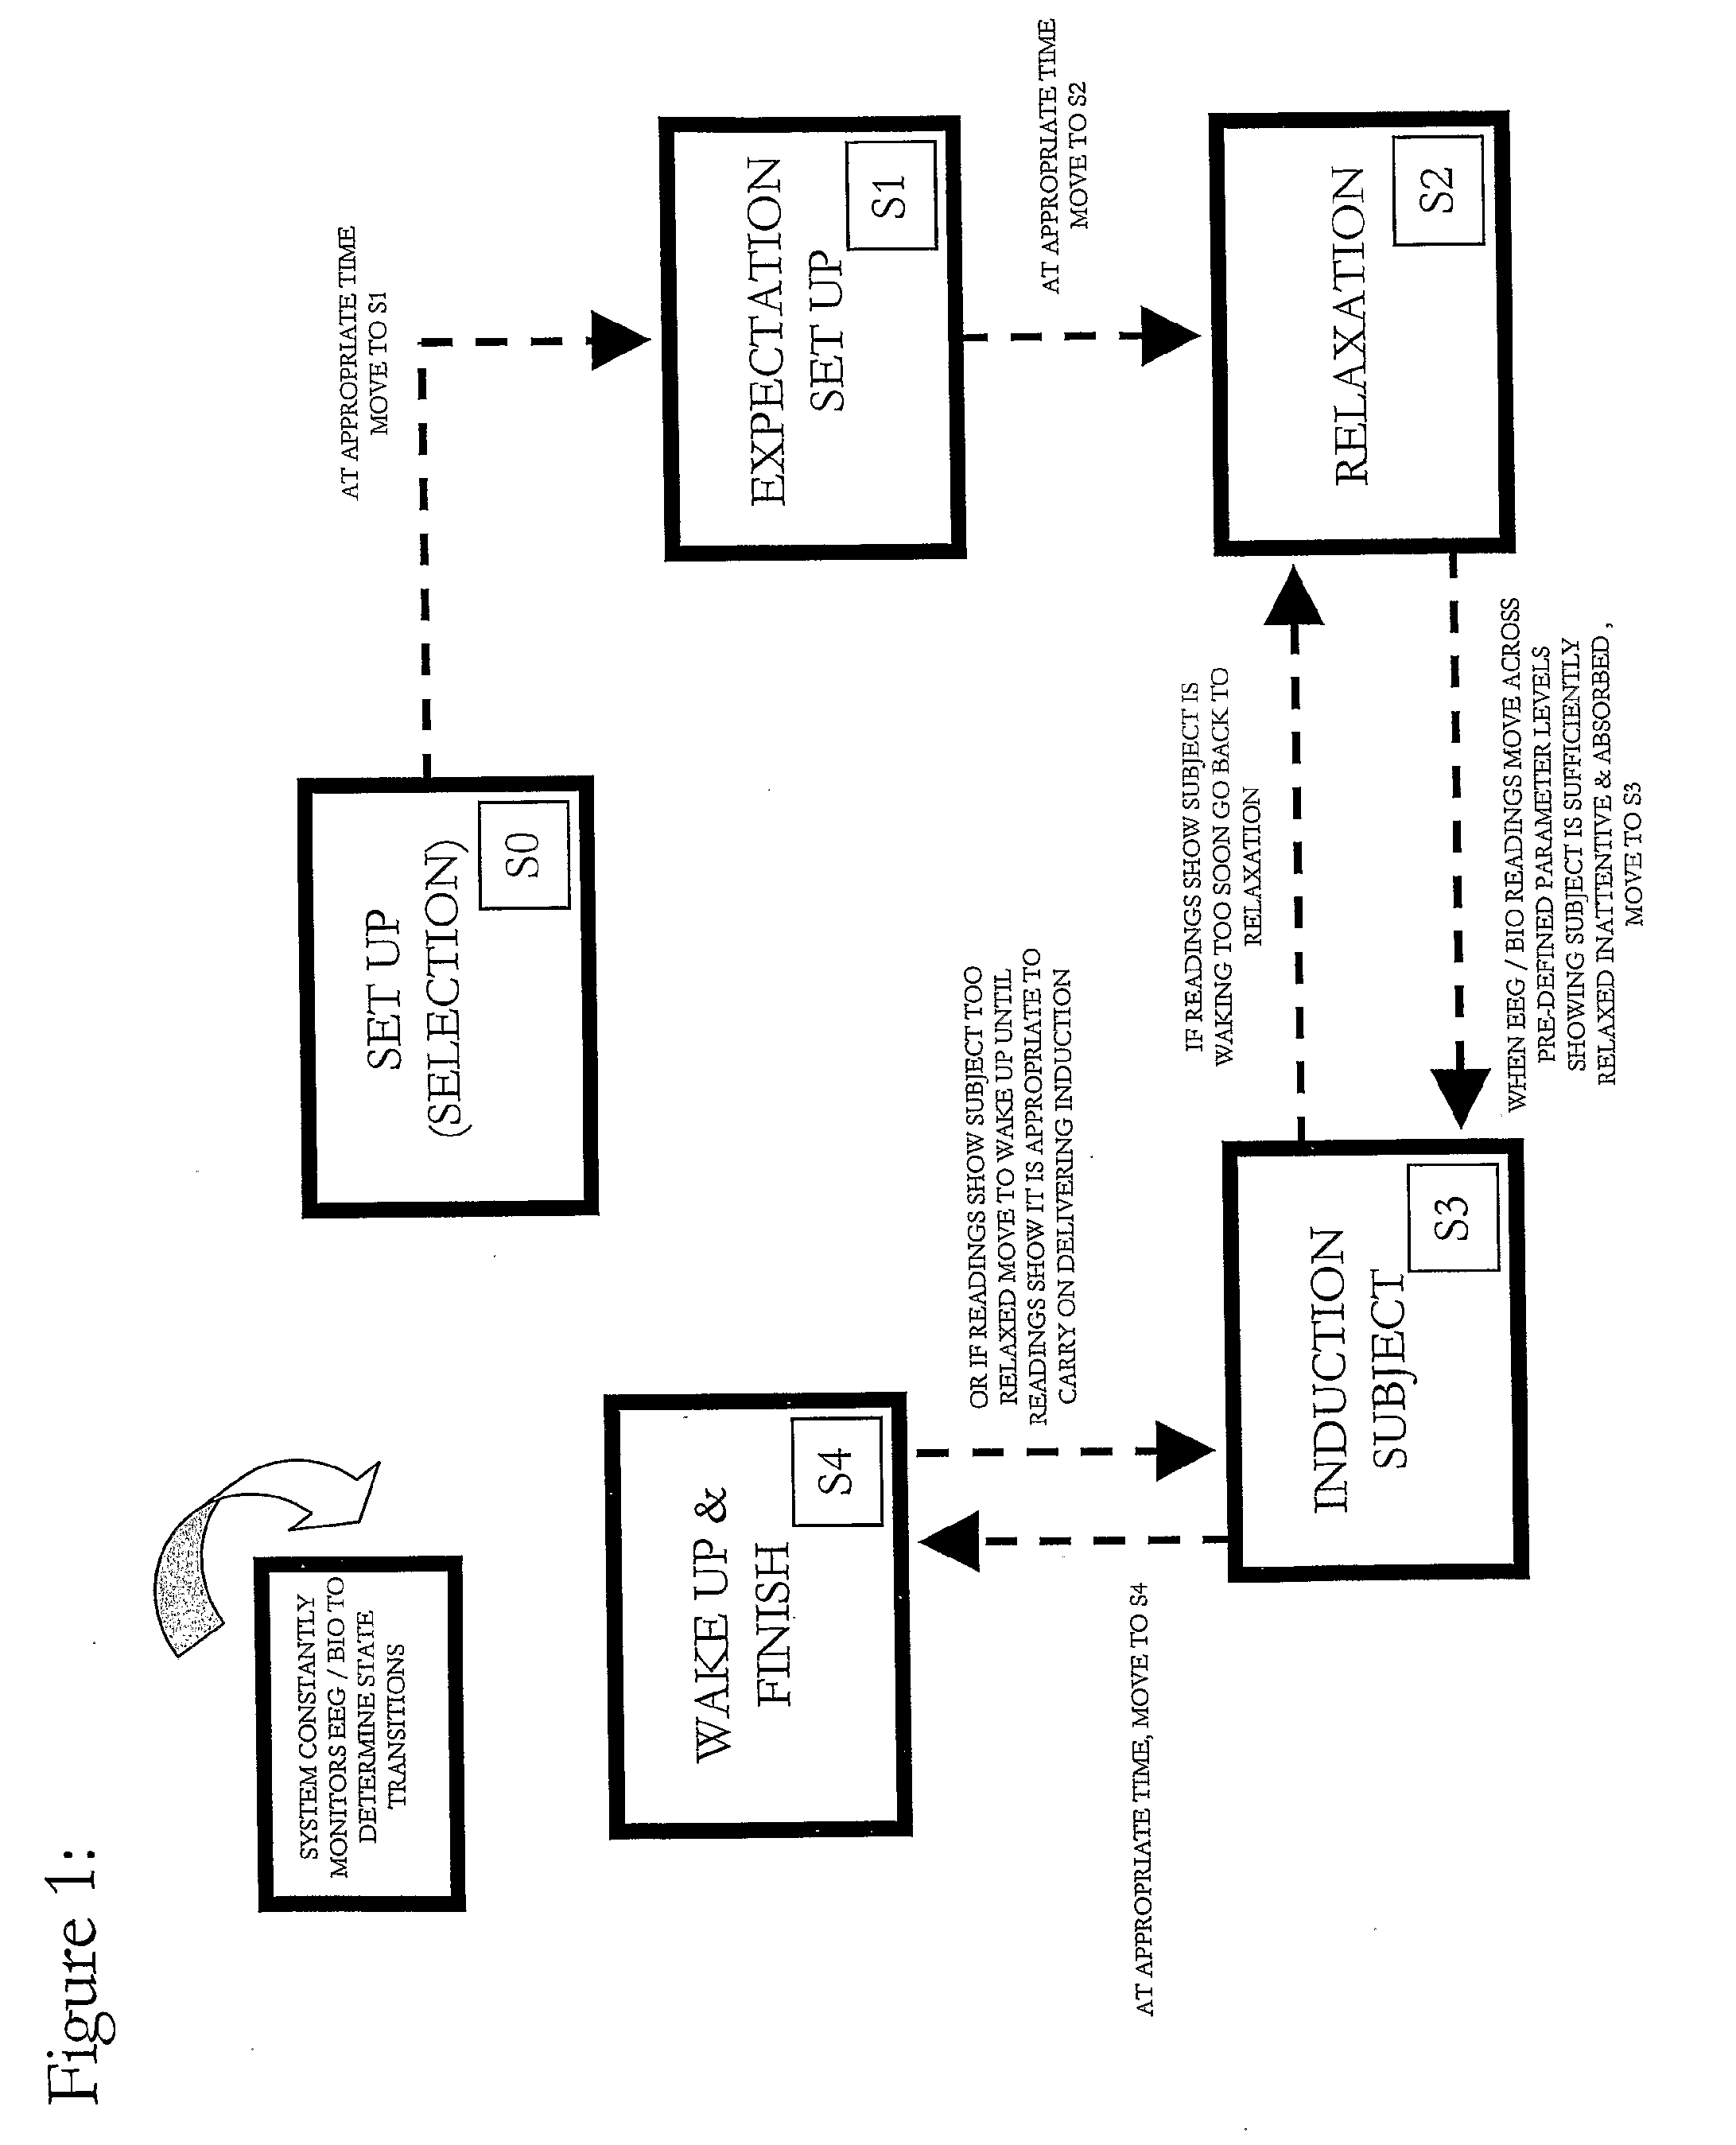 Medical Hypnosis Device For Controlling The Administration Of A Hypnosis Experience